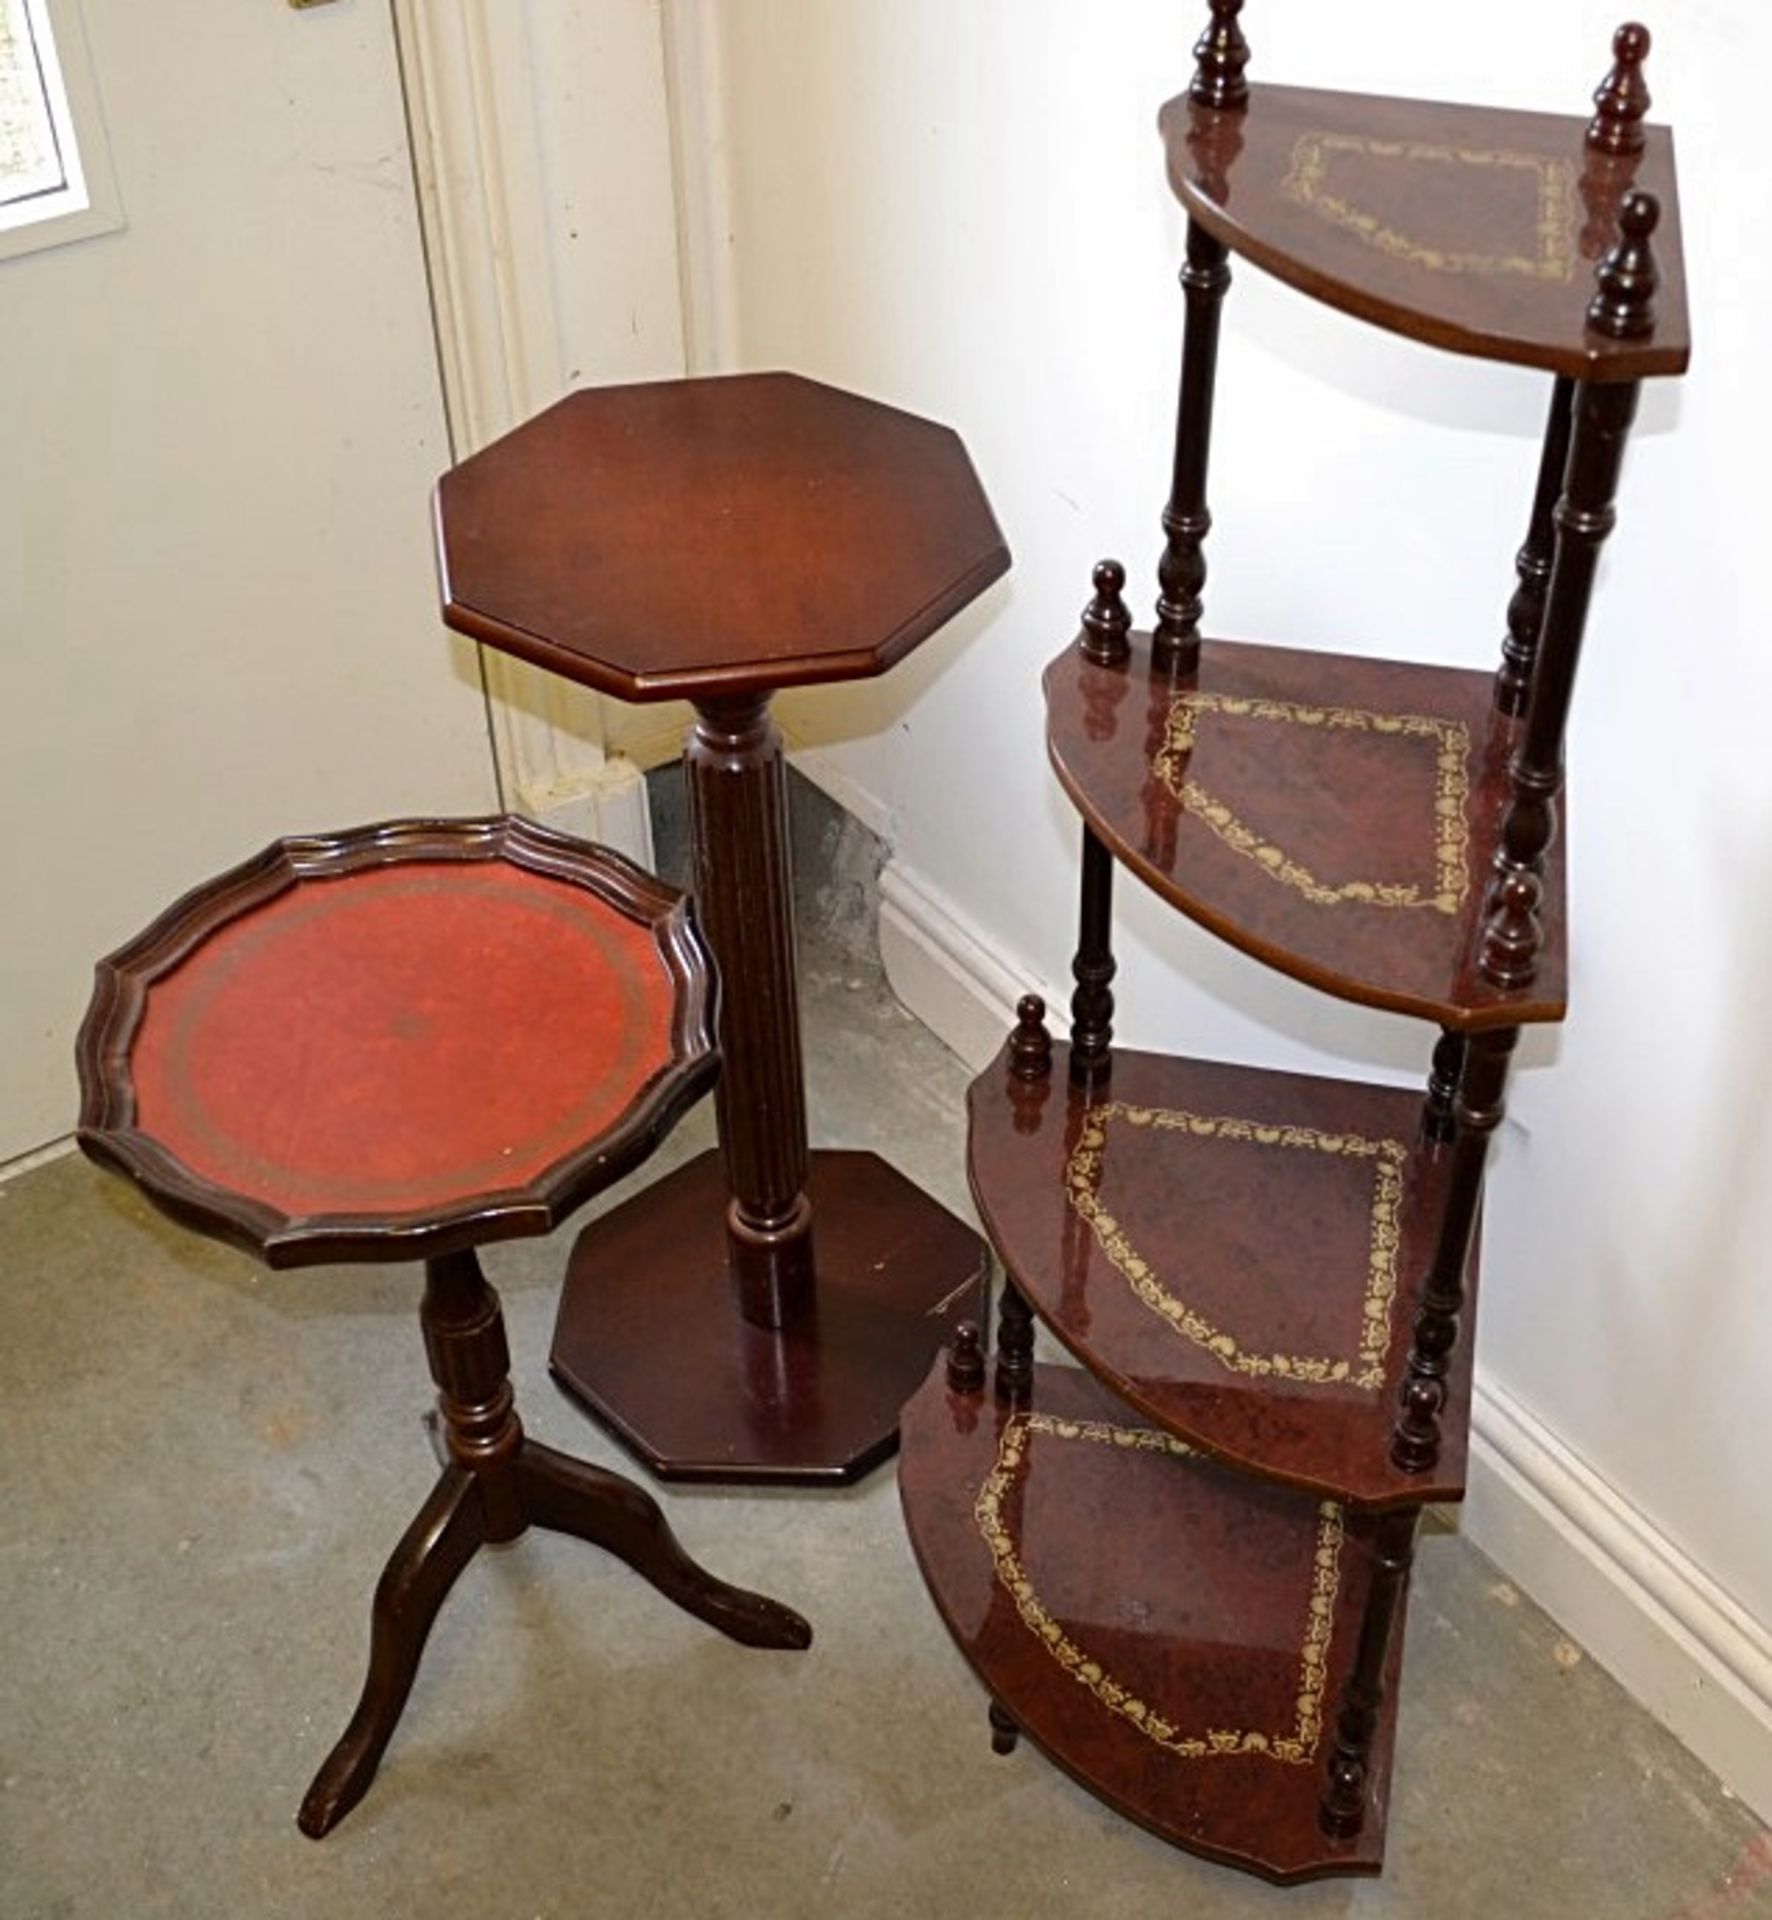 3 x Assorted Plant Stands - From A Clean Manor House Environment In Good Conditions - Sizes Vary